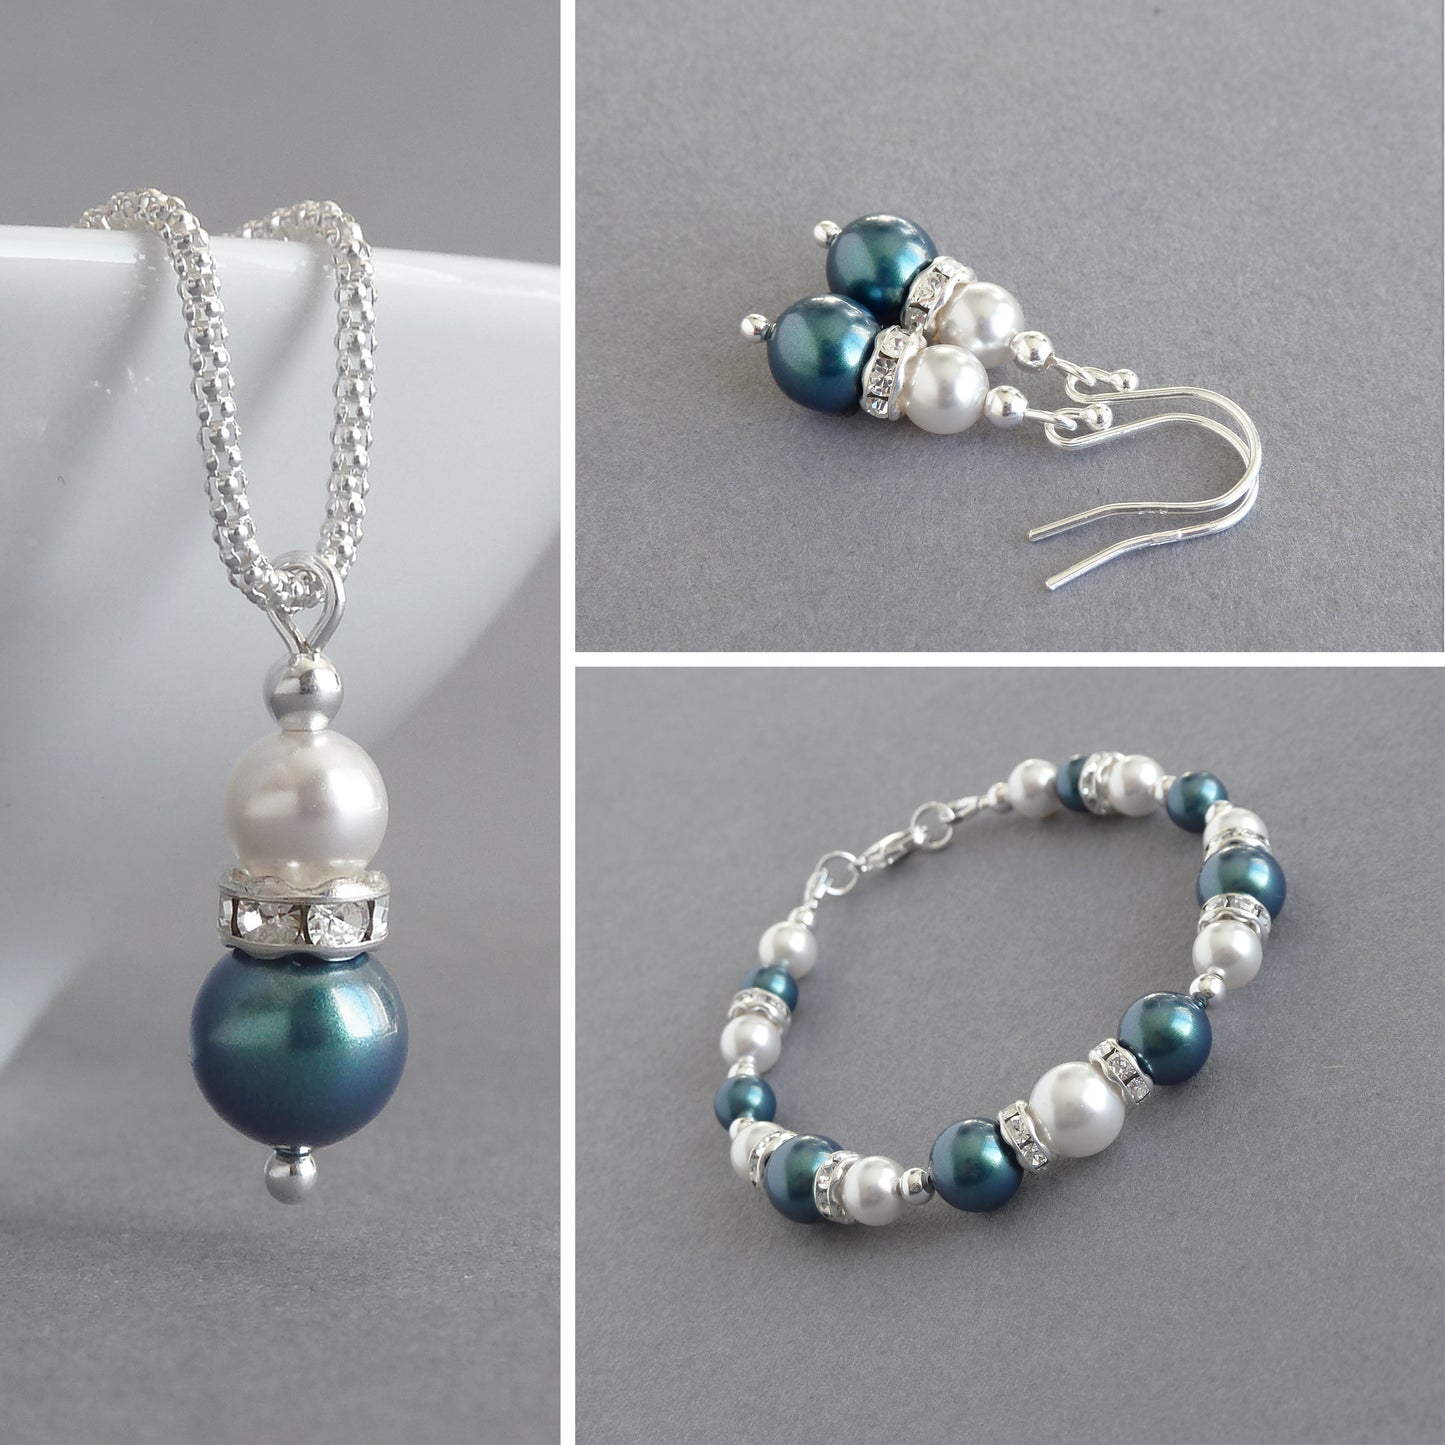 Teal pearl and crystal jewellery set by Anna King Jewellery